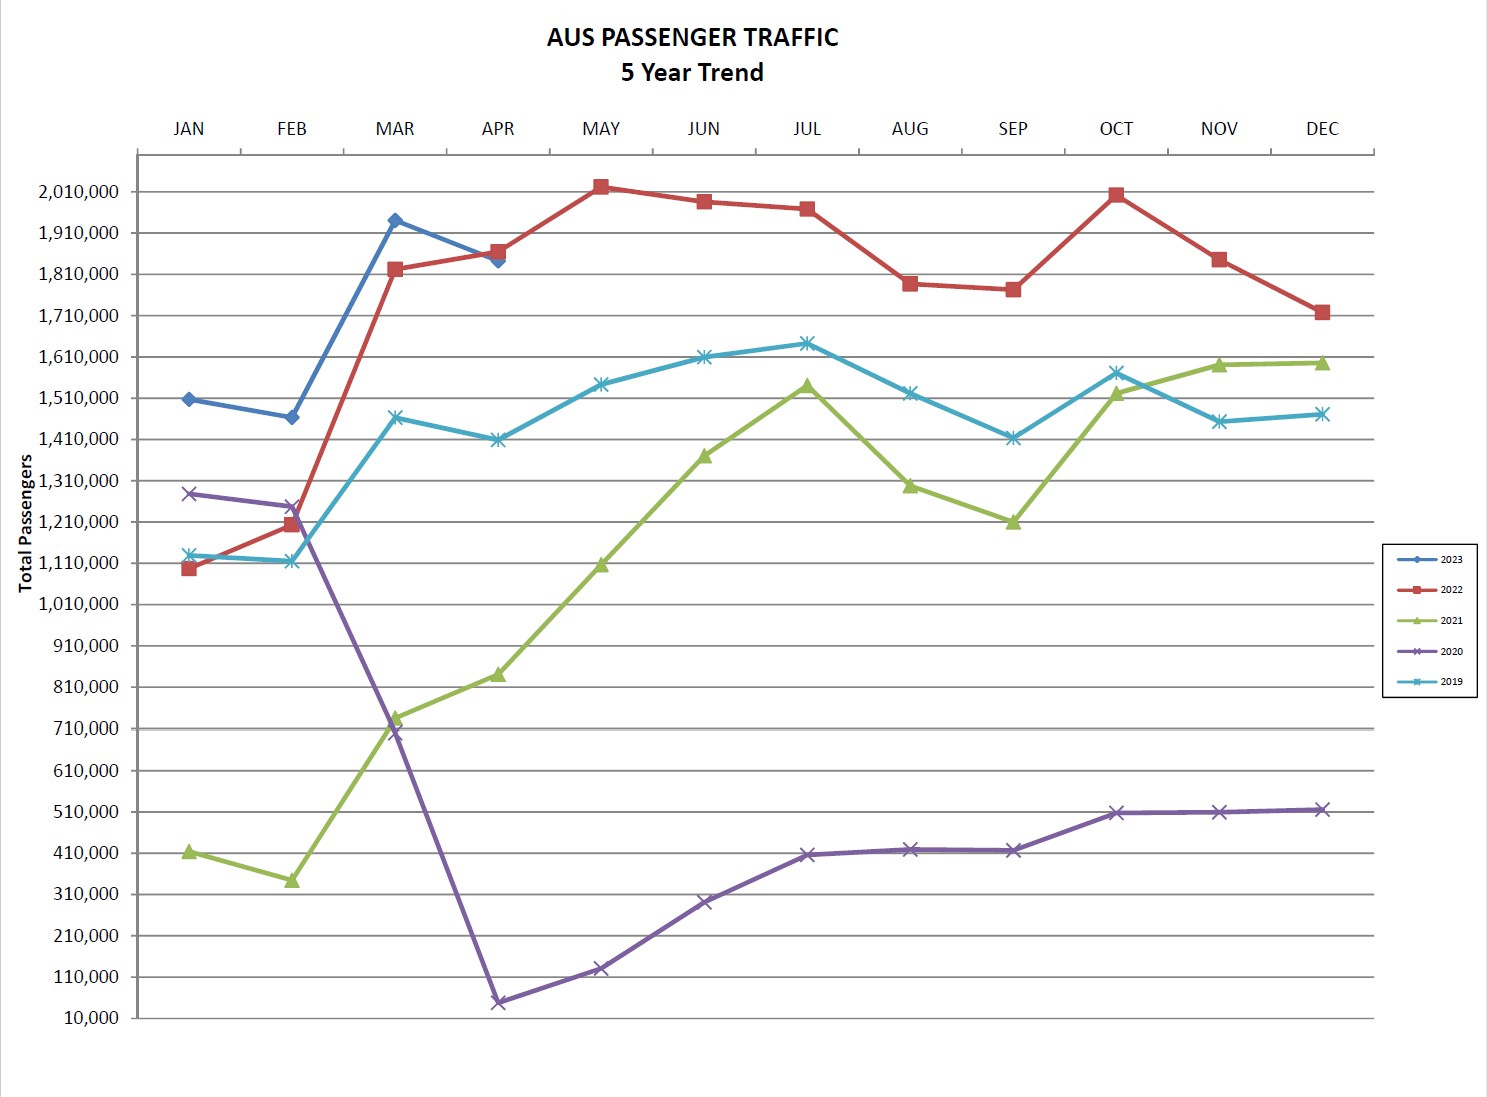 Graph showing 5 year passenger growth at AUS